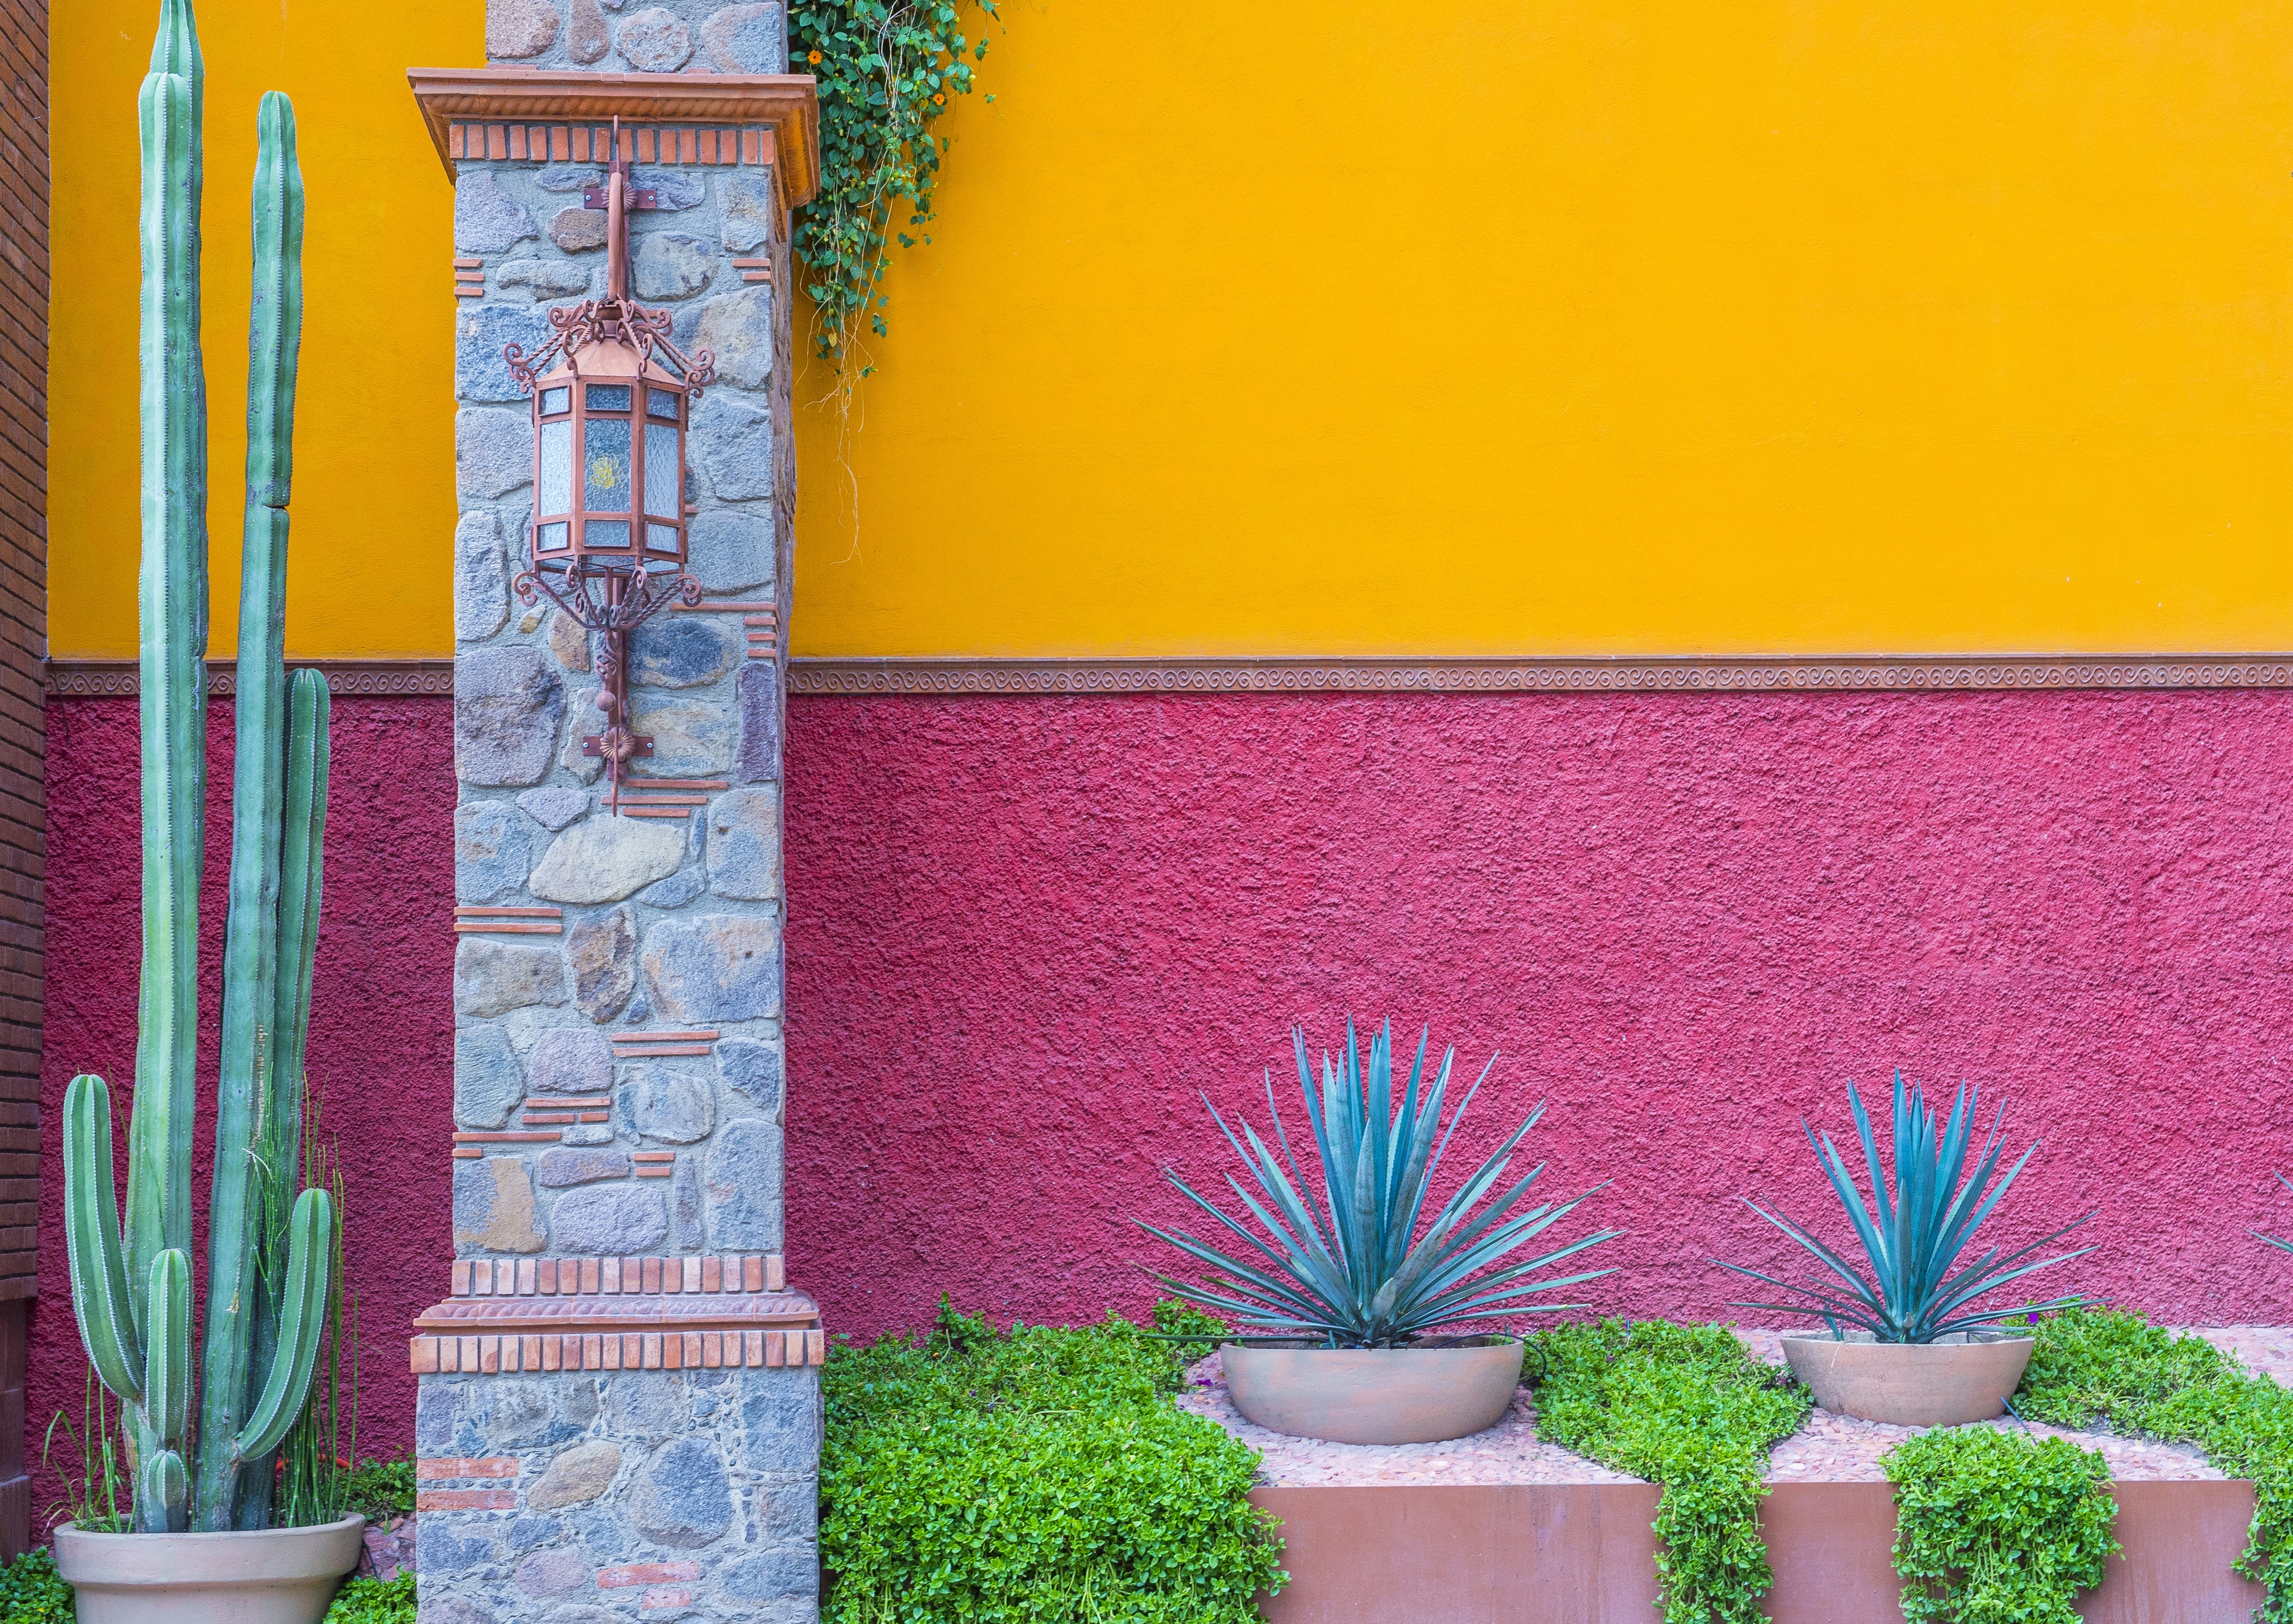 A colorful wall in Mexico